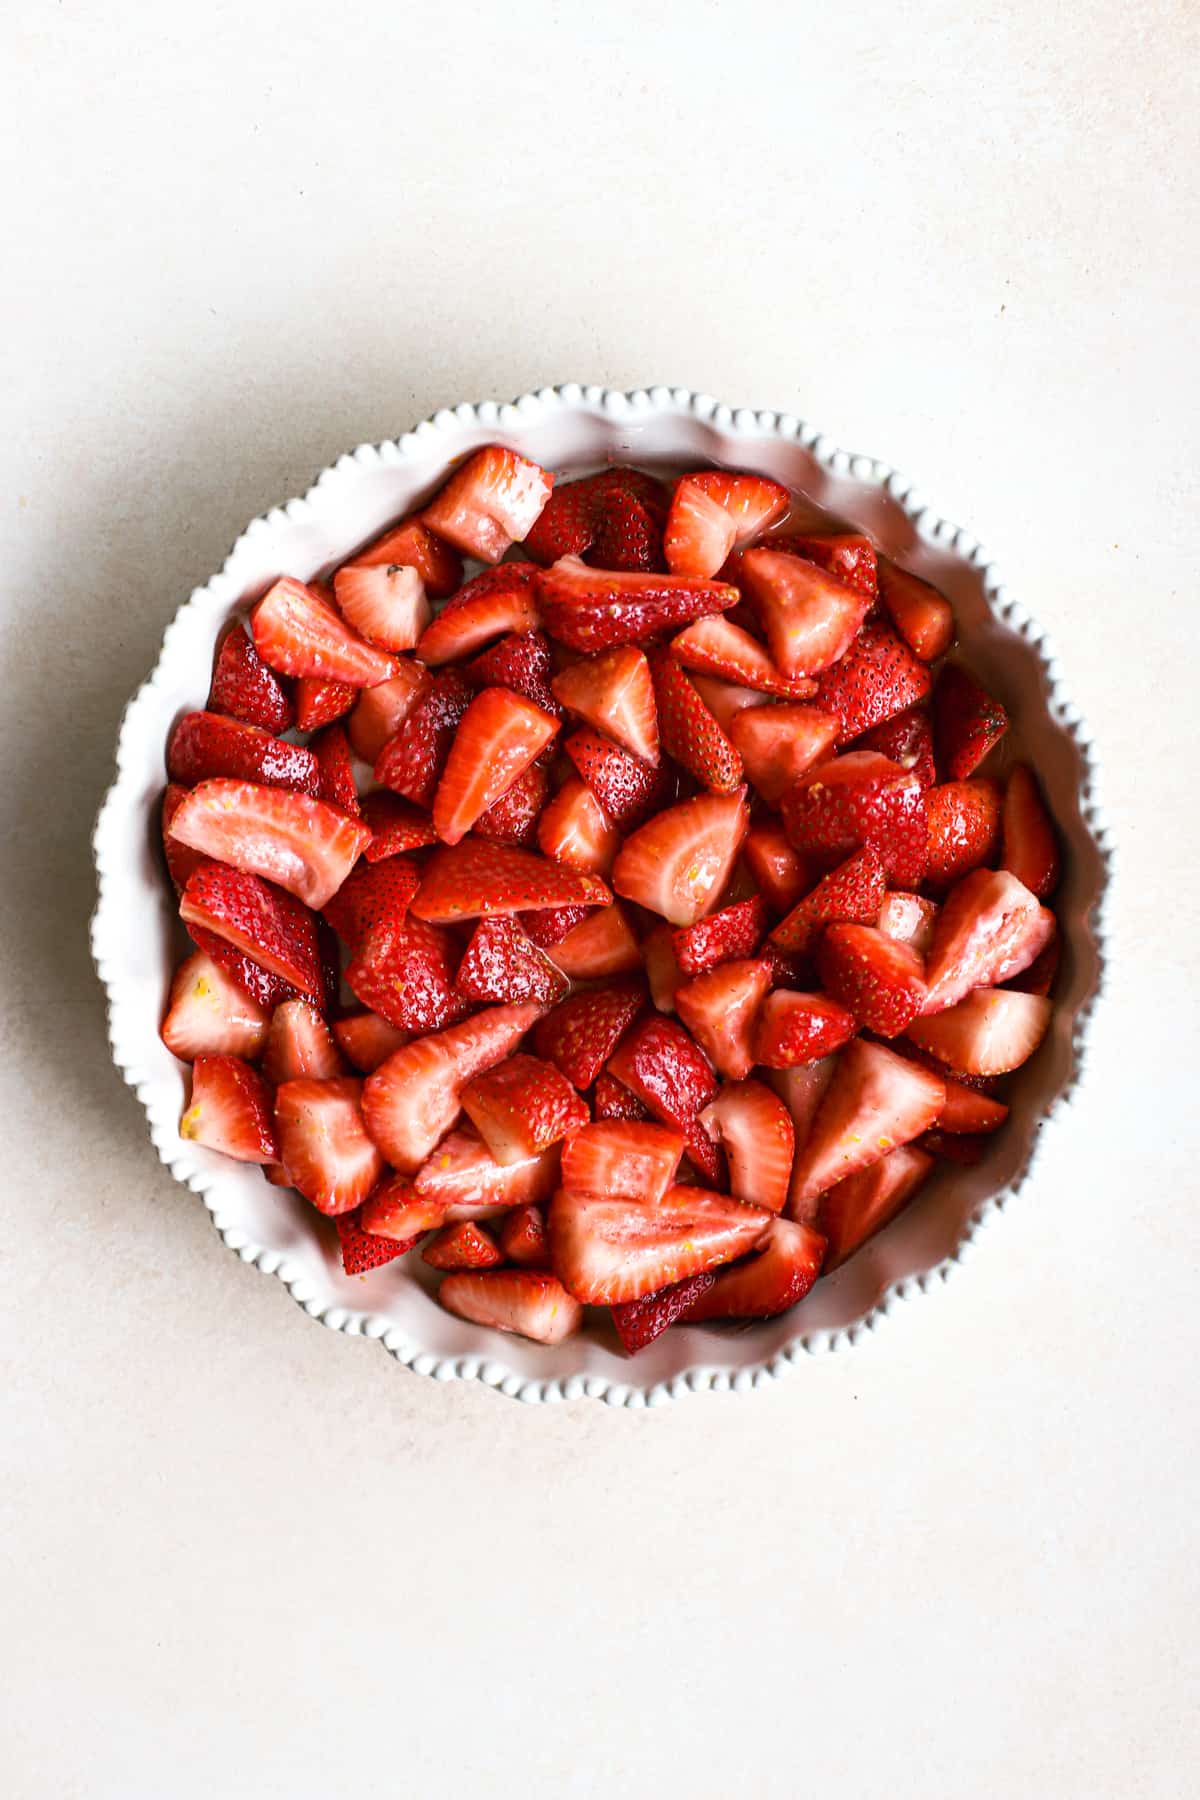 Prepared fresh strawberries in a cream-colored pie dish, on beige and white surface